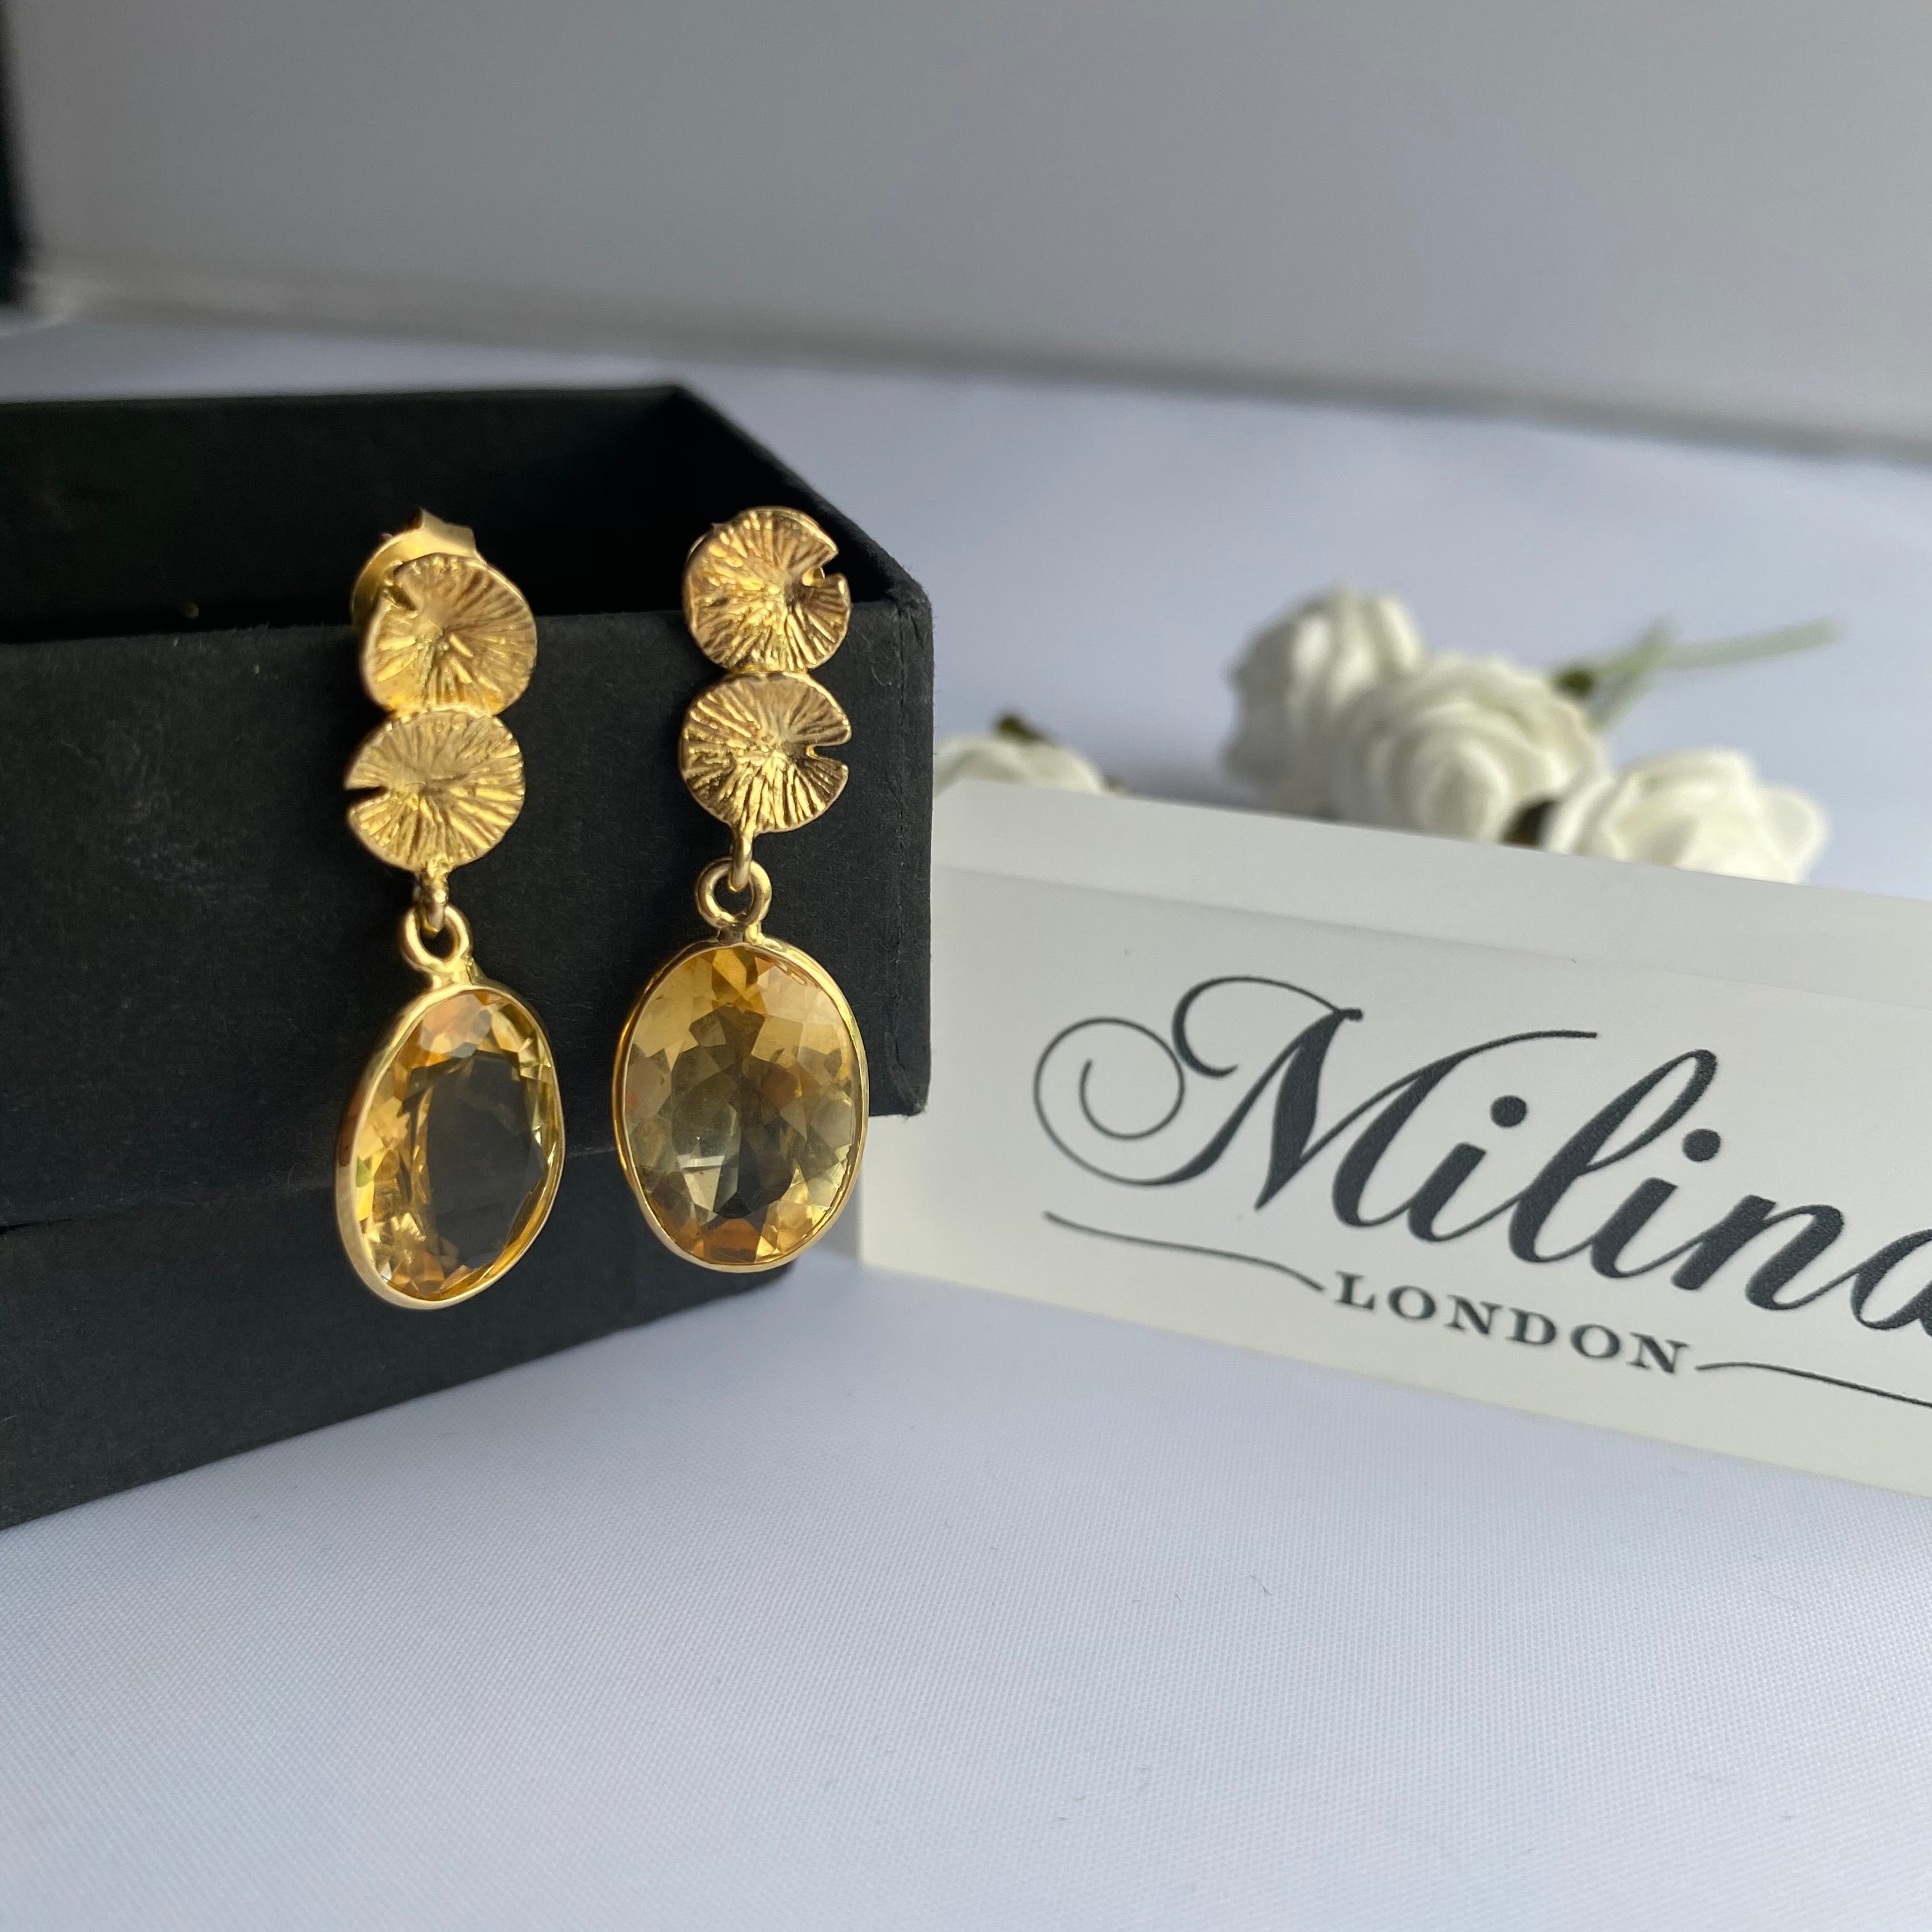 Lily Pad Earrings in Gold Plated Sterling Silver with a Citrine Gemstone Drop